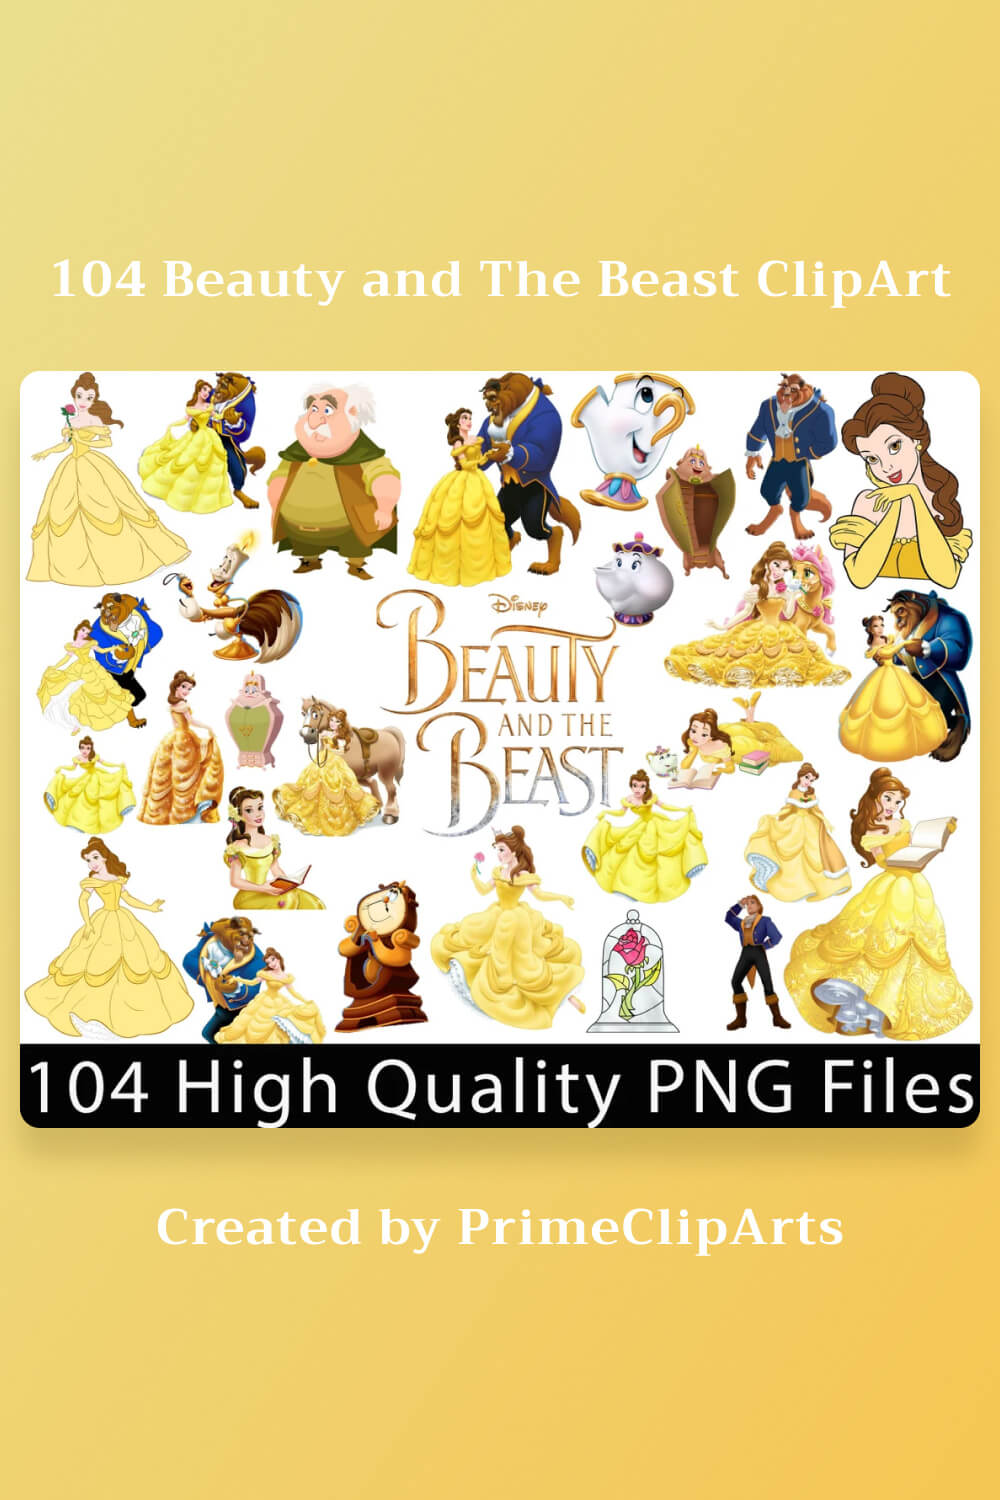 104 Hight Quality PNG Files.